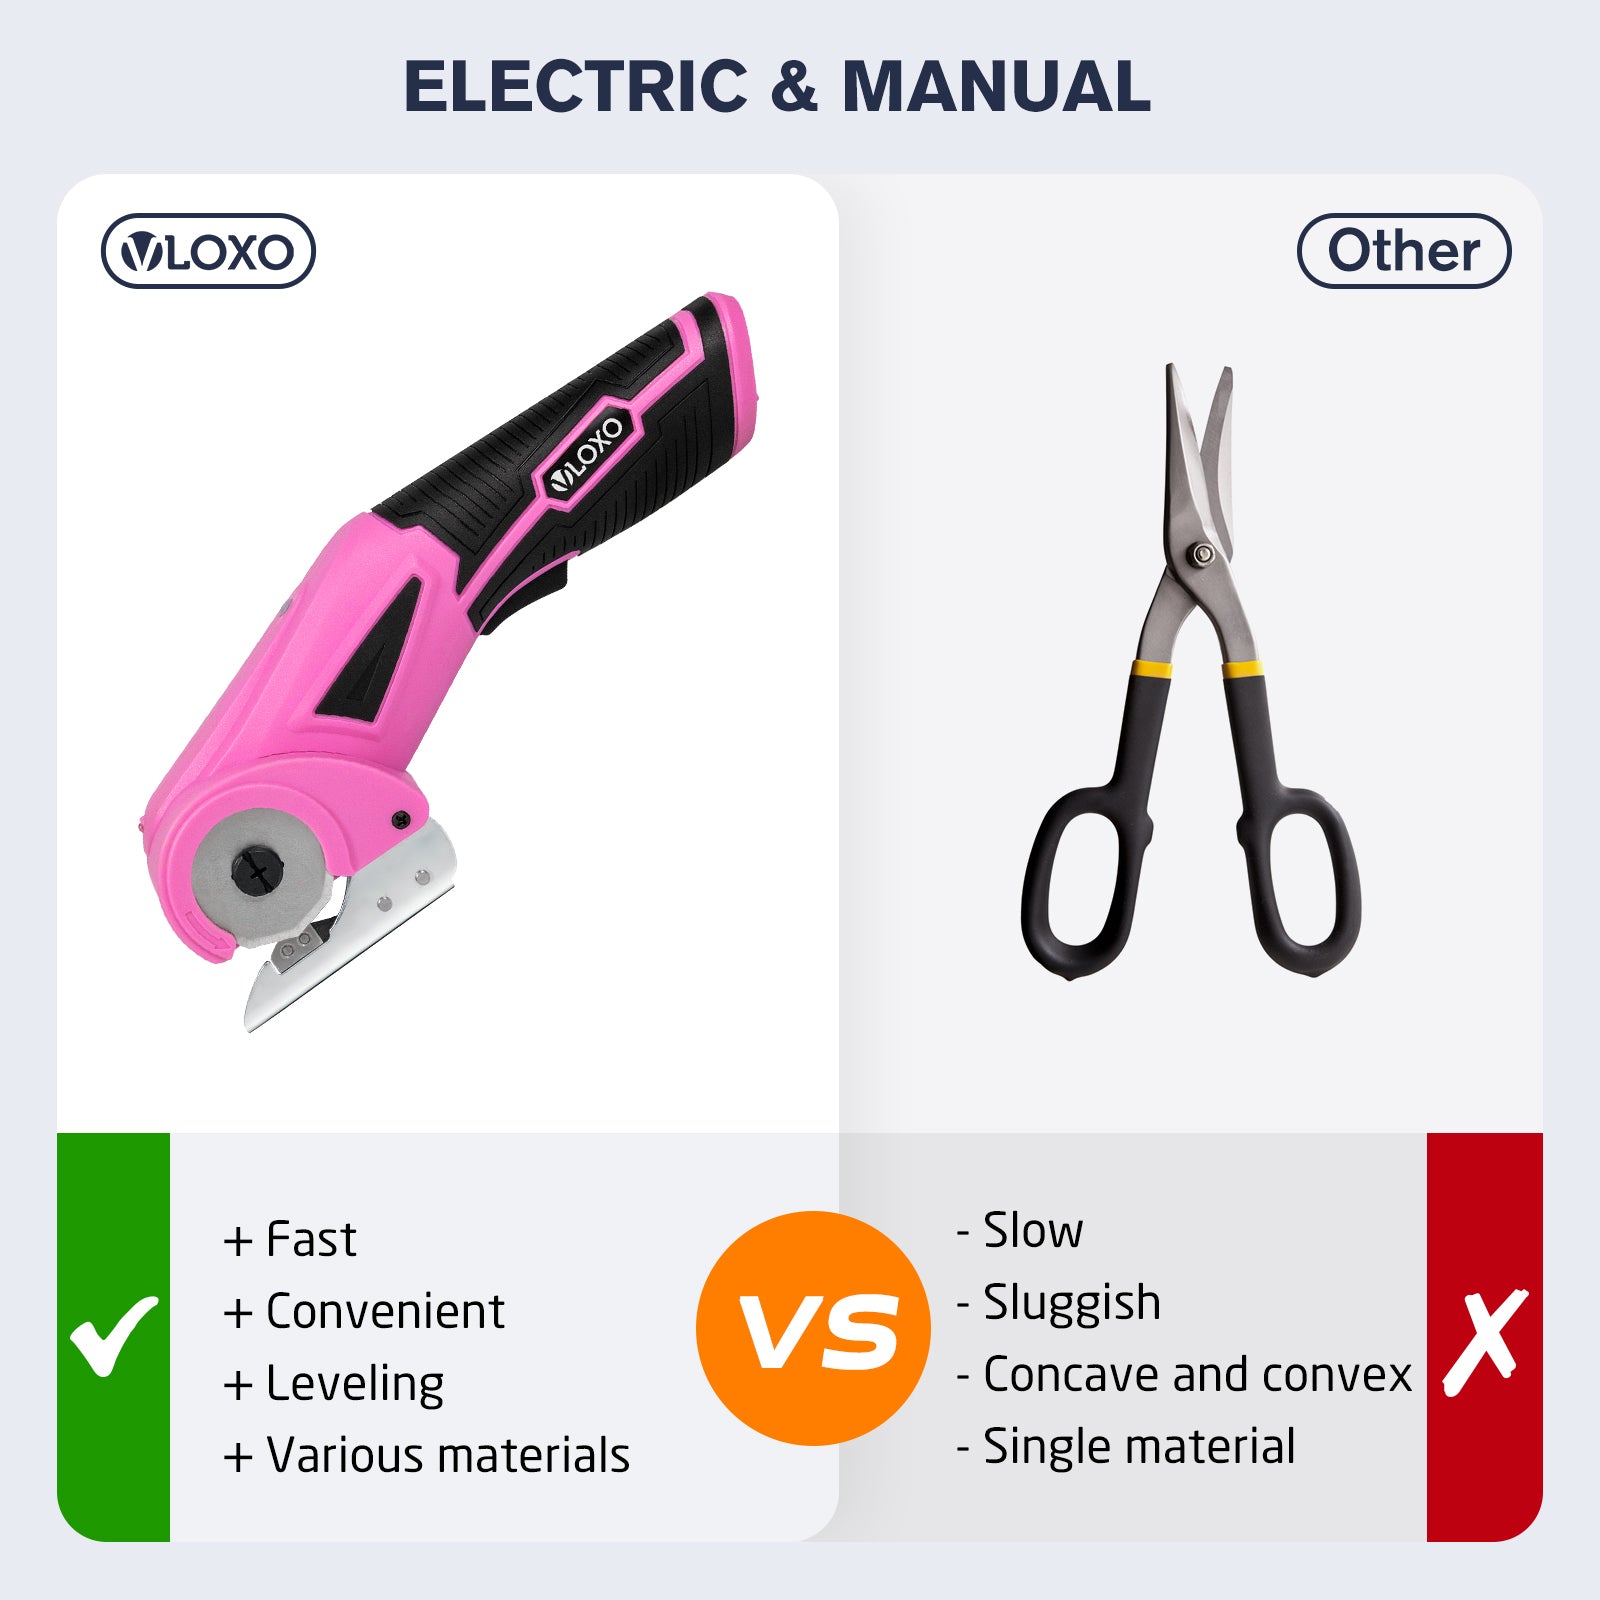 Electric Scissors Rechargeable Cordless Electric Cutter Shear for